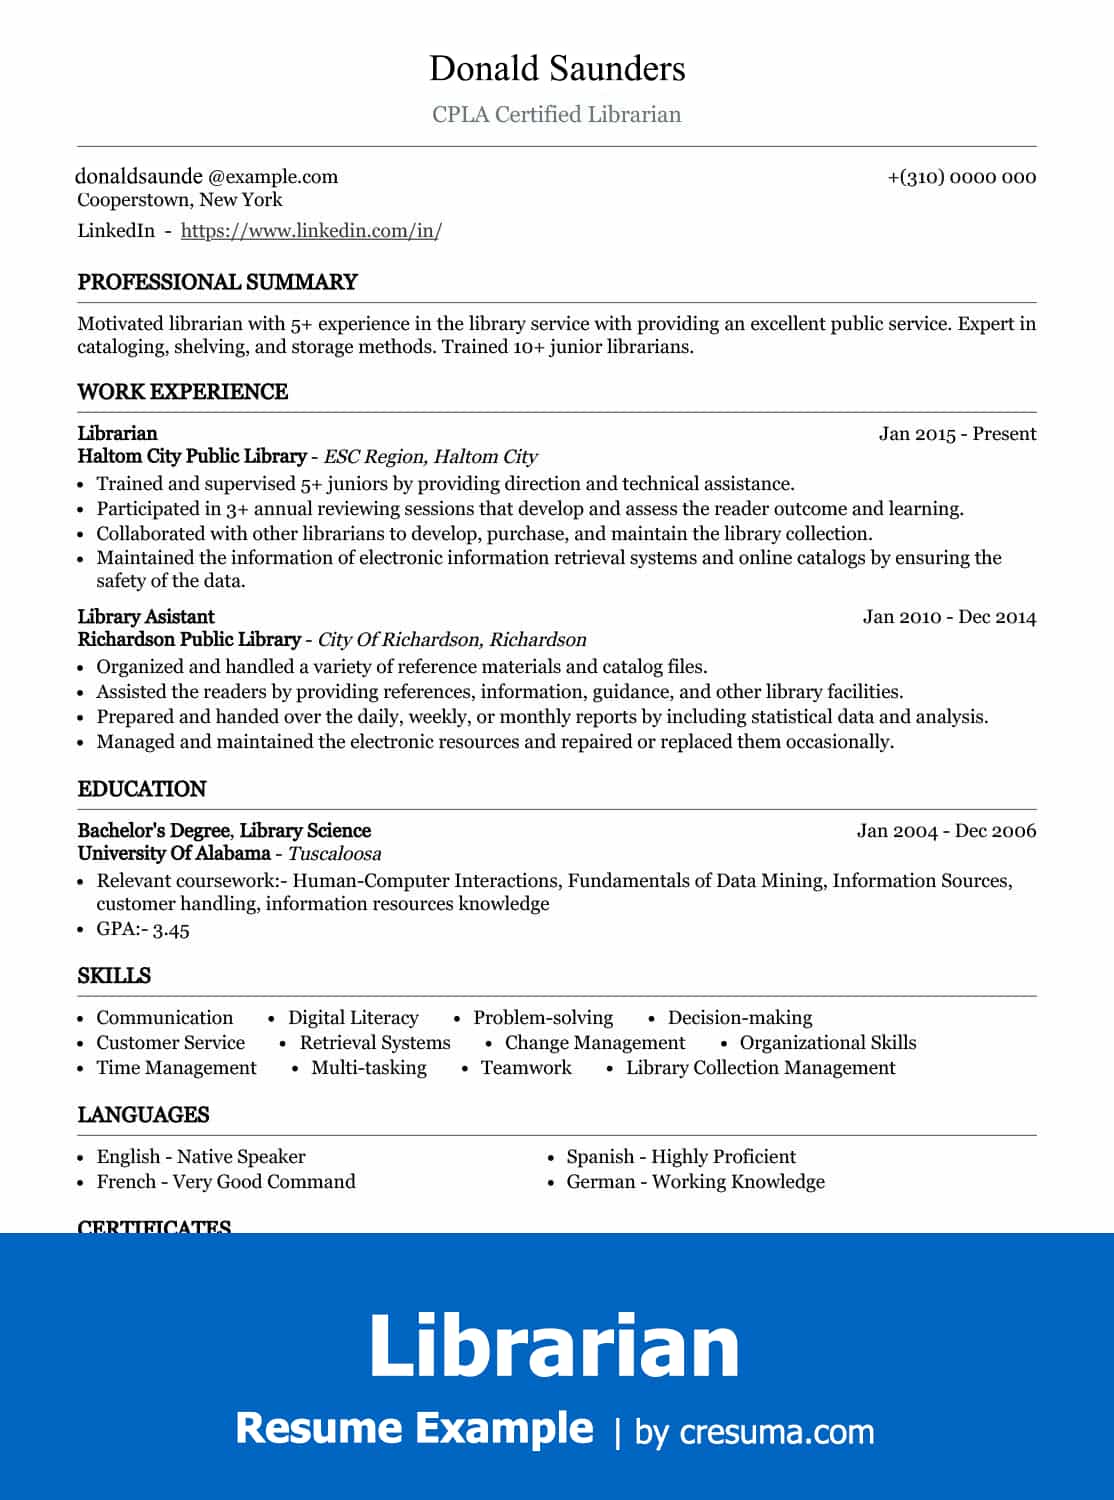 librarian resume example image